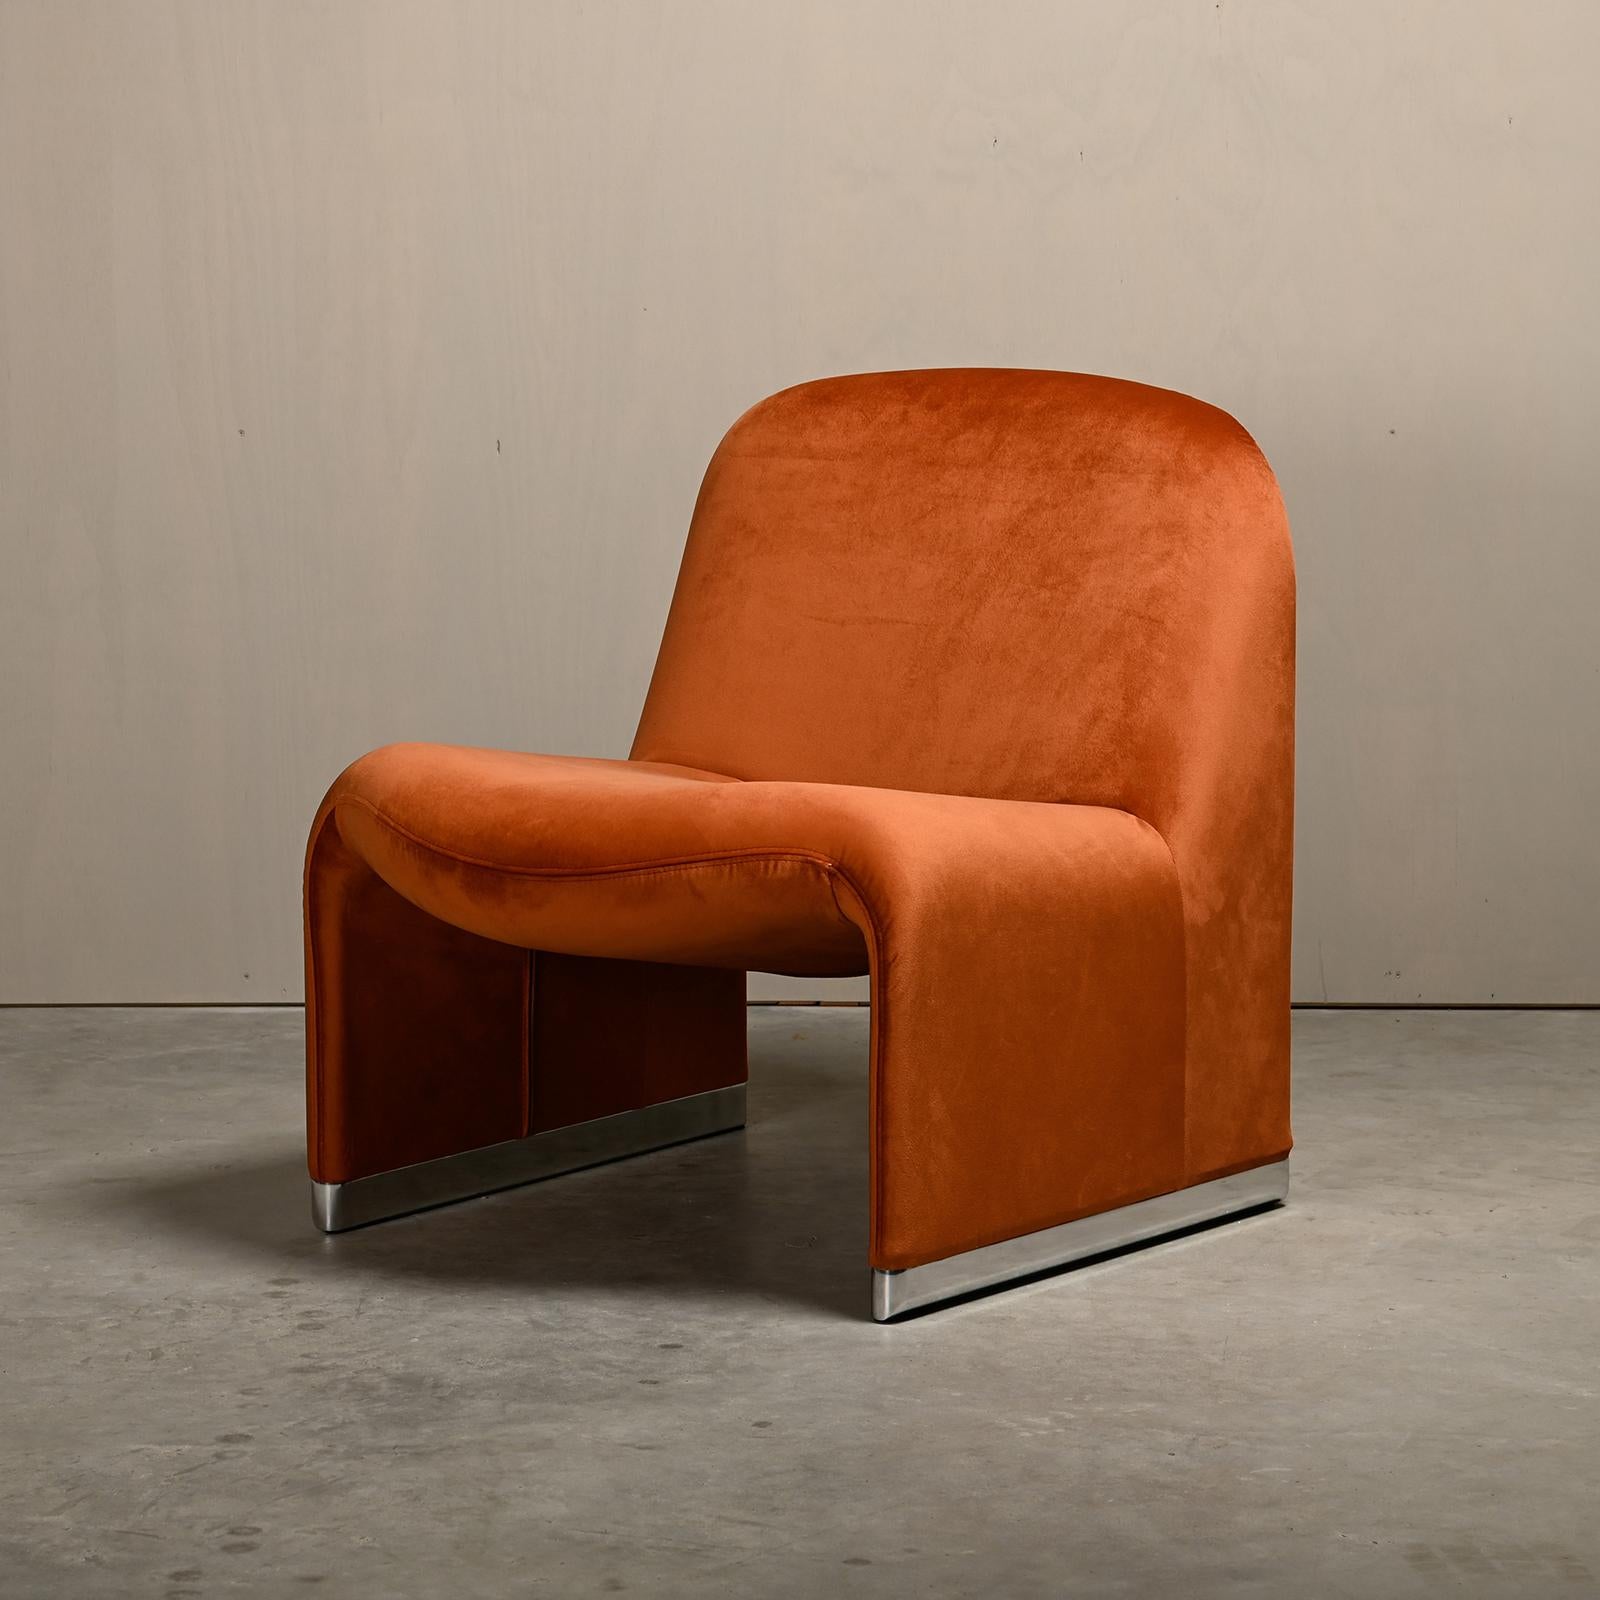 Iconic Alky lounge chair designed by Giancarlo Piretti in the sixties for Anonima Castelli, Italy. The shape of the chair is construct with foam printed direct on a metal frame with elastic bands, to ensure comfort and stability. The chair is